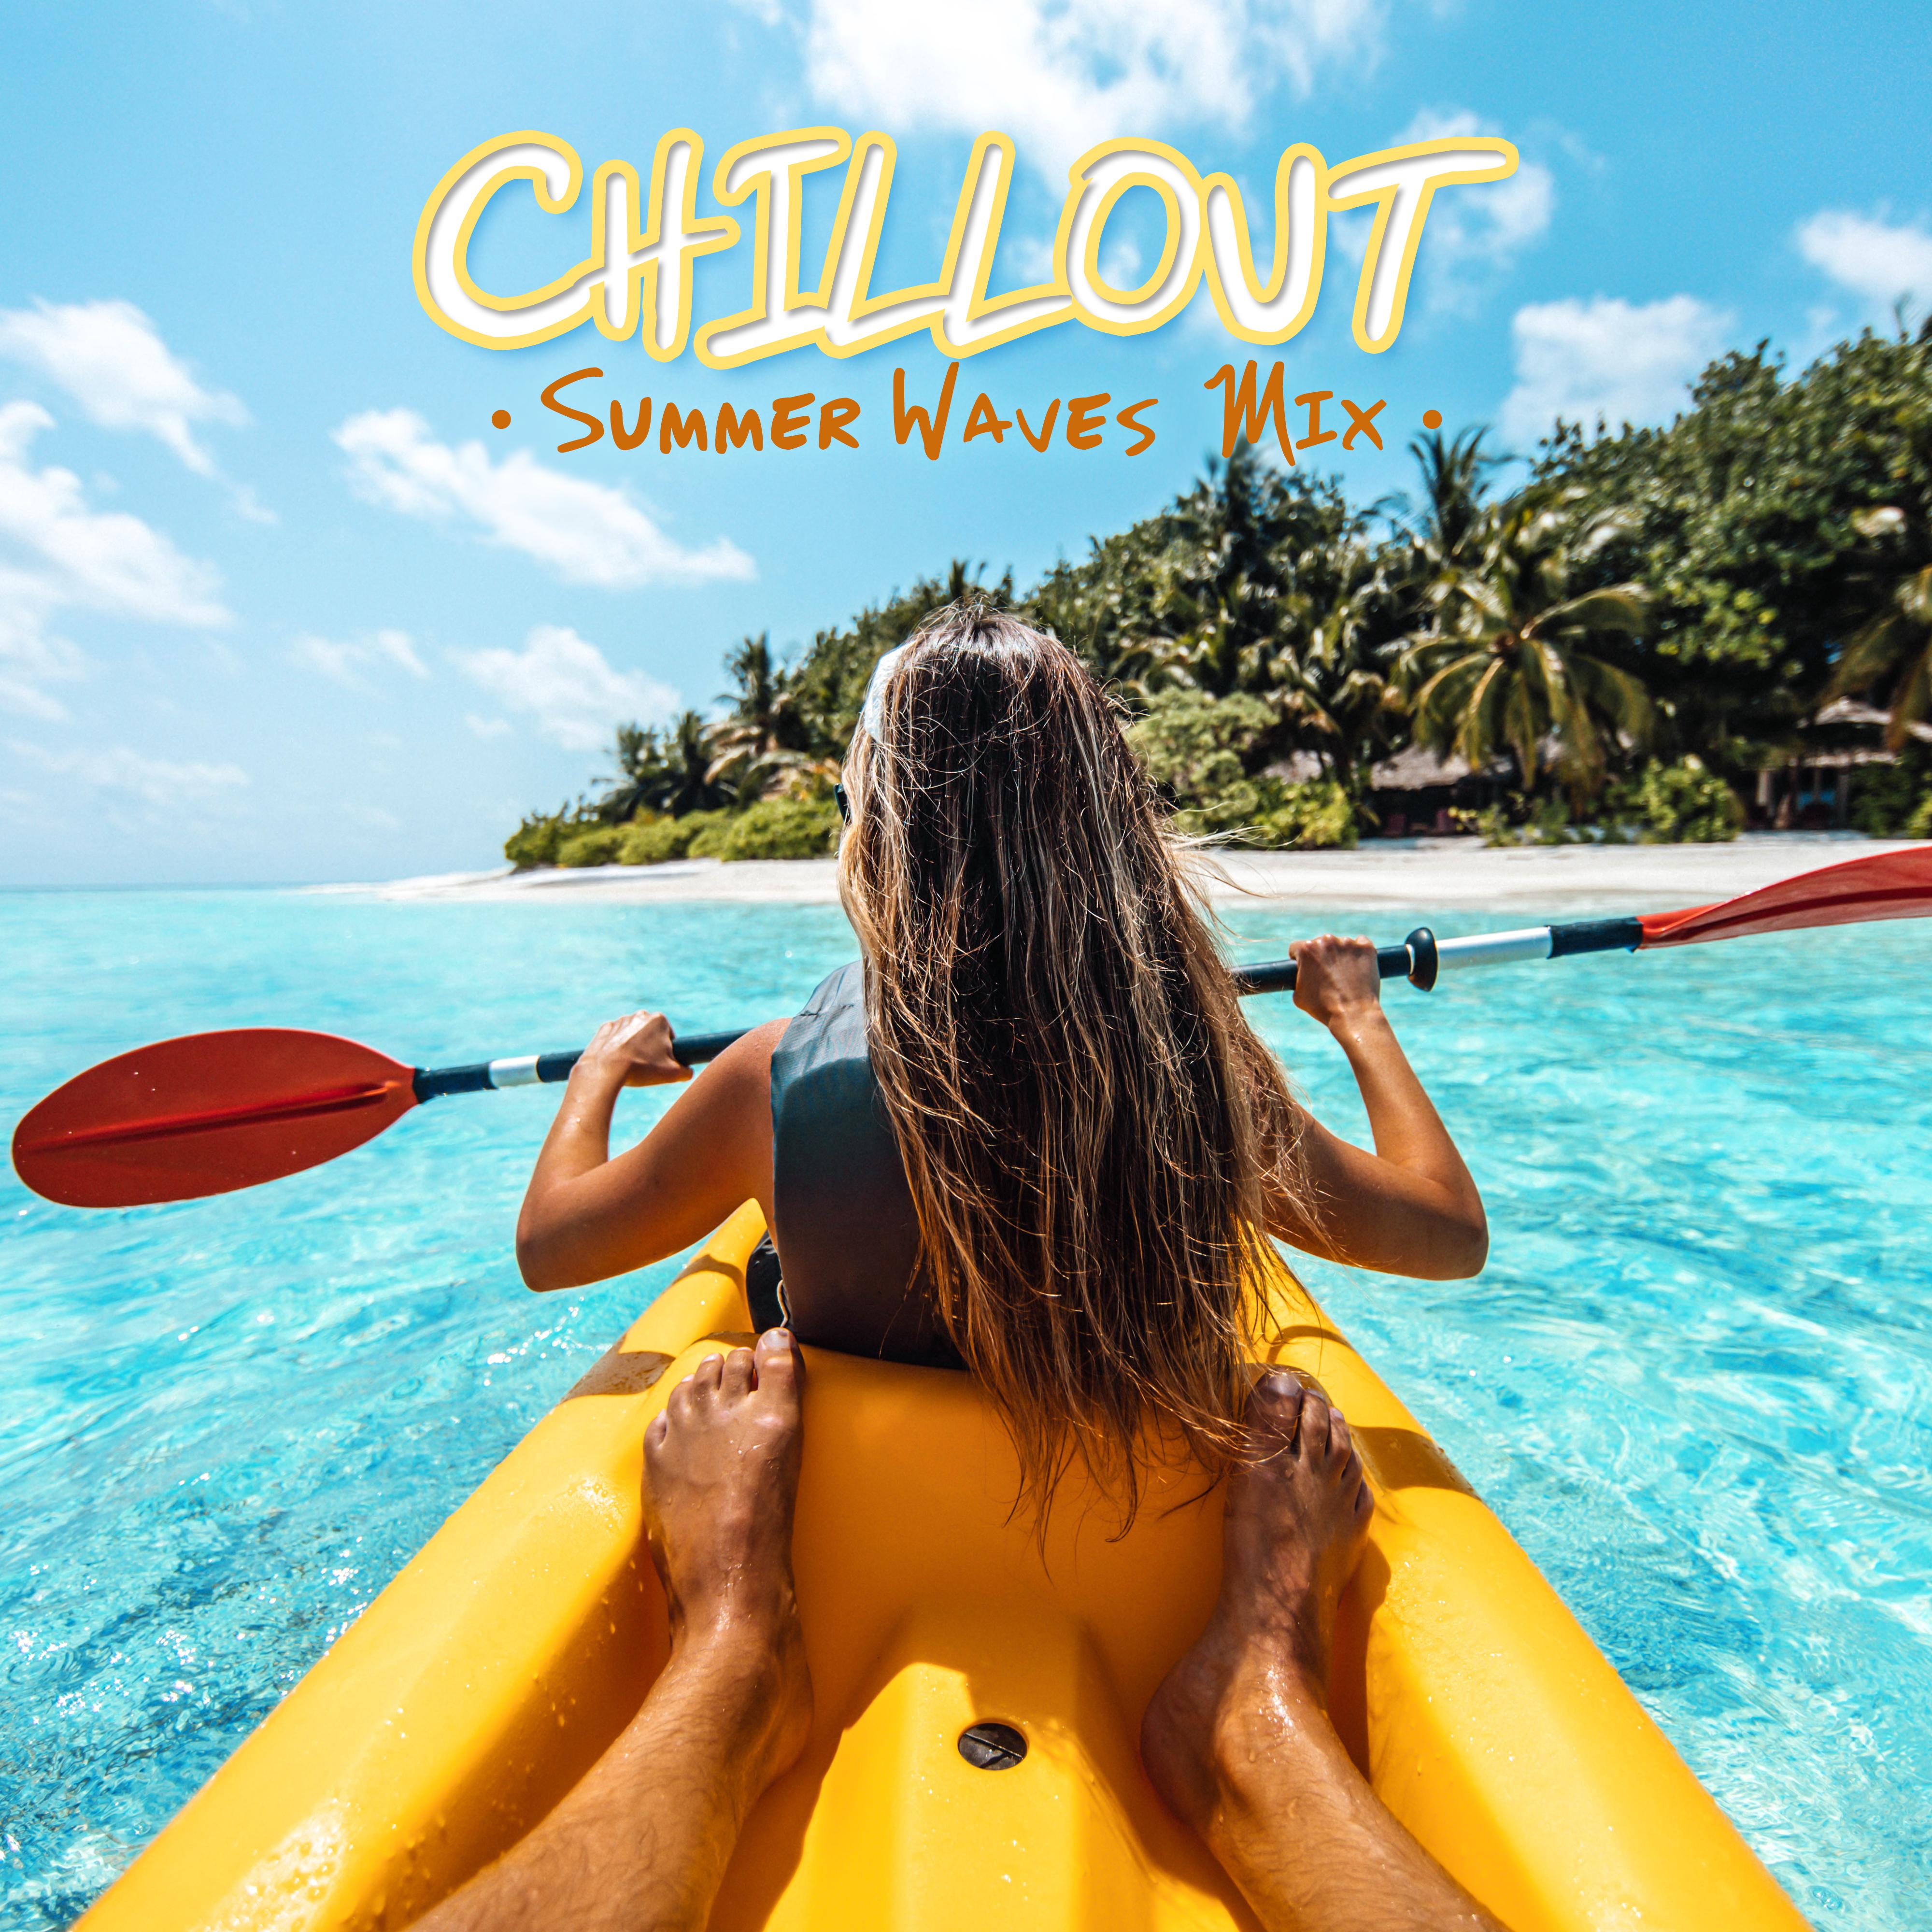 Chillout Summer Waves Mix: 2019 Chill Out Music Compilation, Ambient Melodies, Deep Sunny Holiday Beats